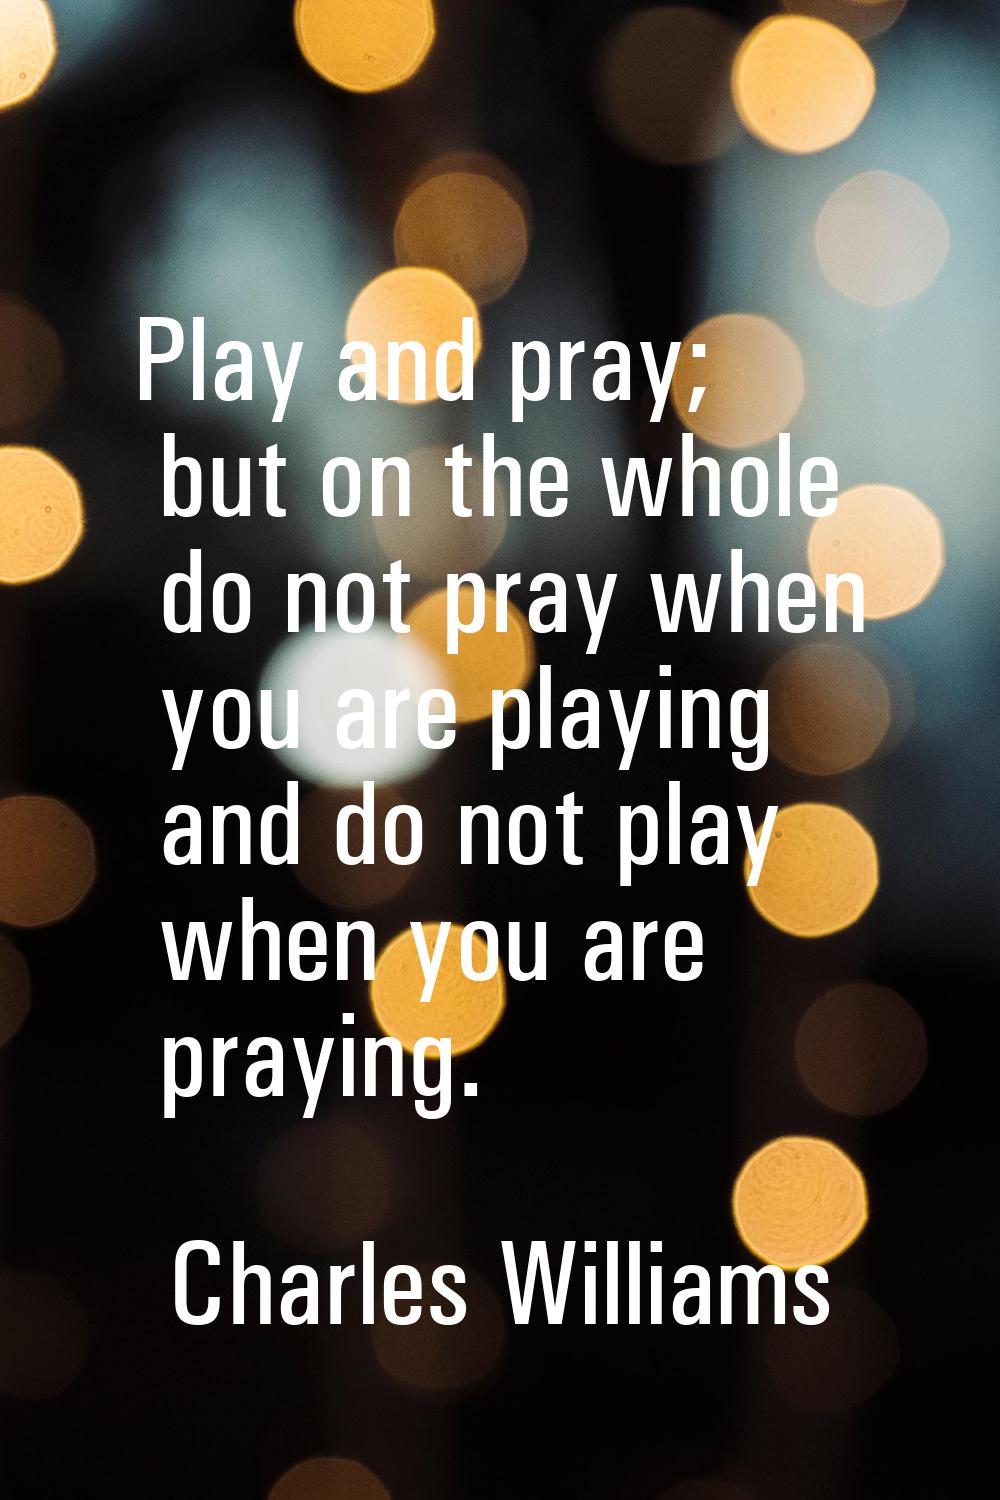 Play and pray; but on the whole do not pray when you are playing and do not play when you are prayi